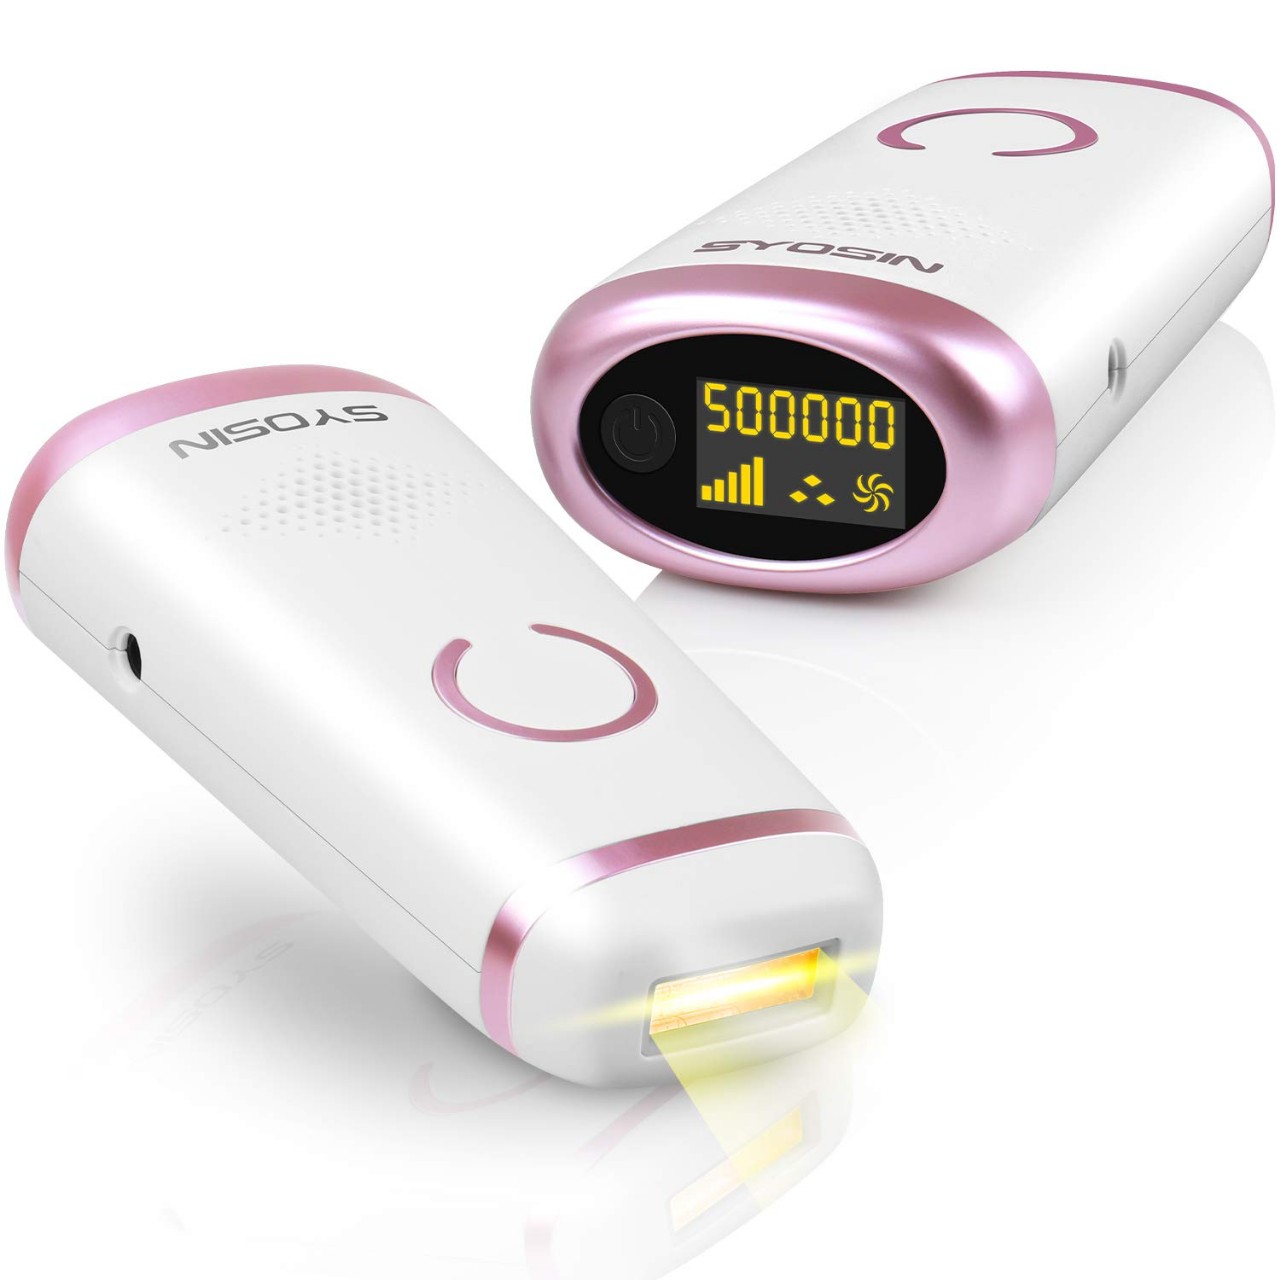 IPL Permanent Hair Removal, SYOSIN 500,000 Flashes Hair Removal with LCD Display Painless Epilator